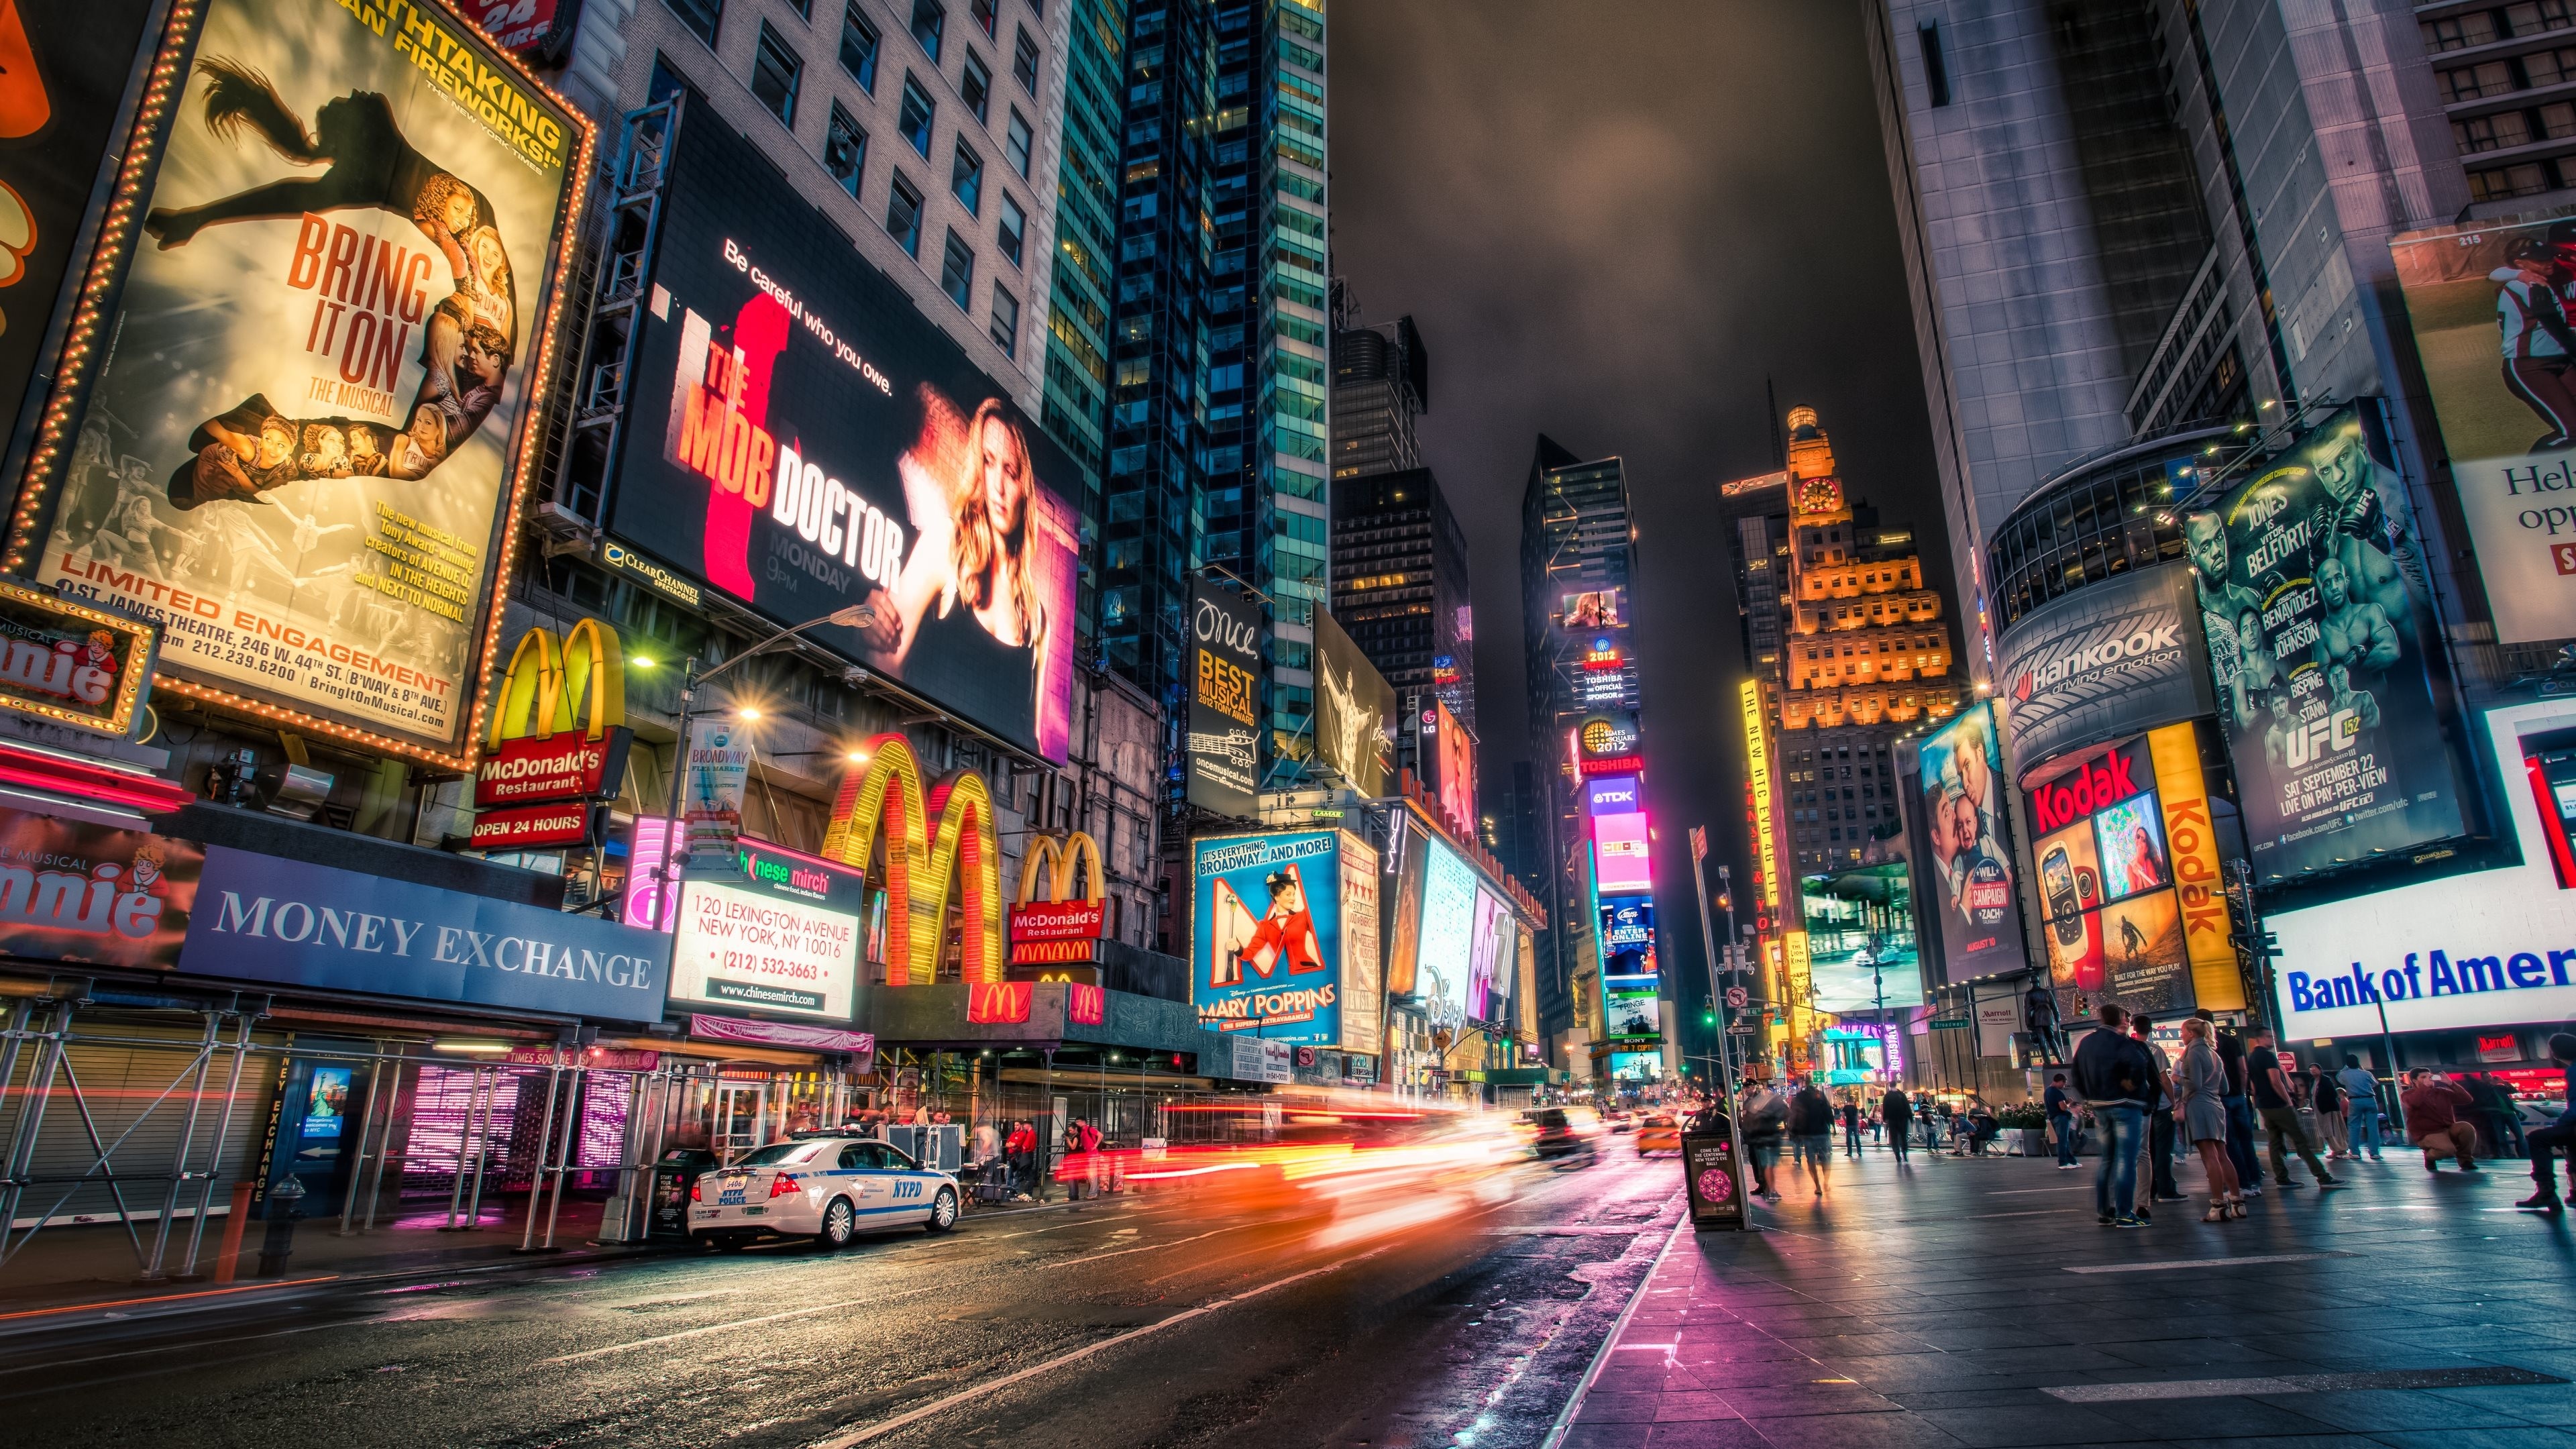 New York: Times Square, A major commercial intersection, tourist destination, entertainment hub, and neighborhood in Midtown Manhattan. 3840x2160 4K Wallpaper.